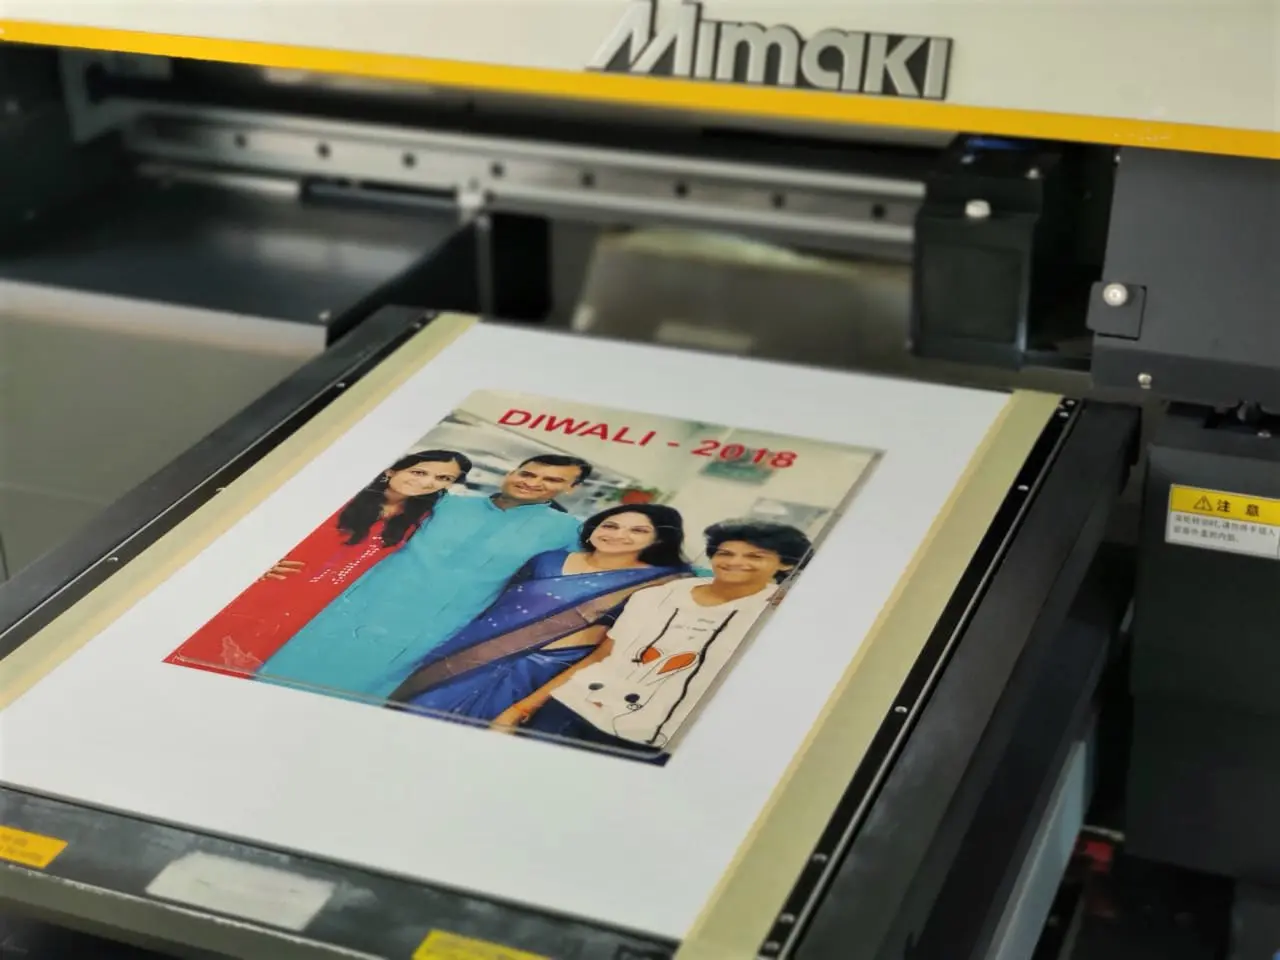 Mimaki Ultra Violet flatbed printer printing a family photo on a die cut jigsaw puzzle to create a great personalised gift